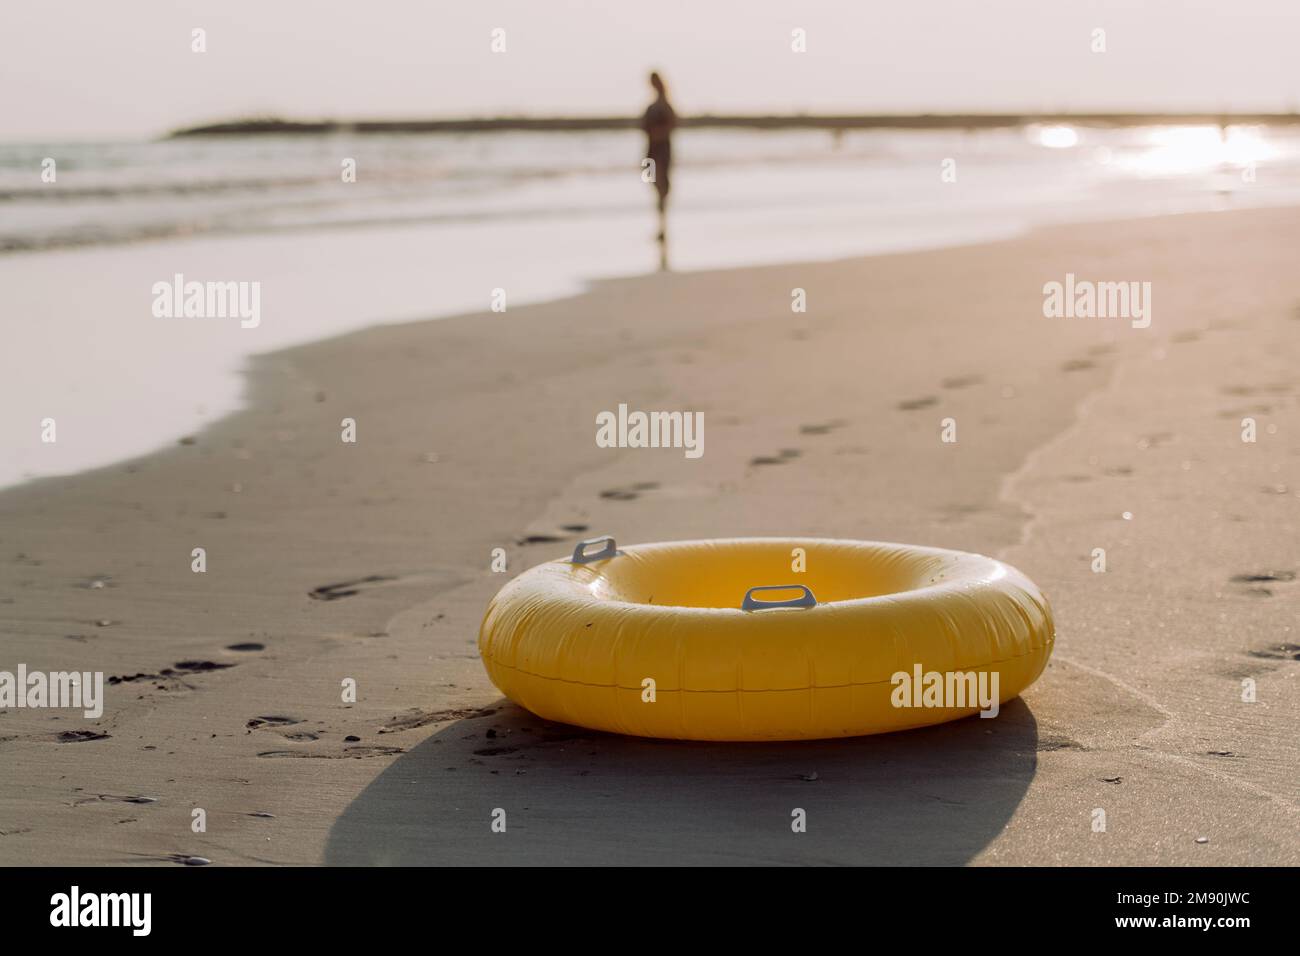 Close-up of yellow inflatable wheel on the beach, with person in background. Stock Photo